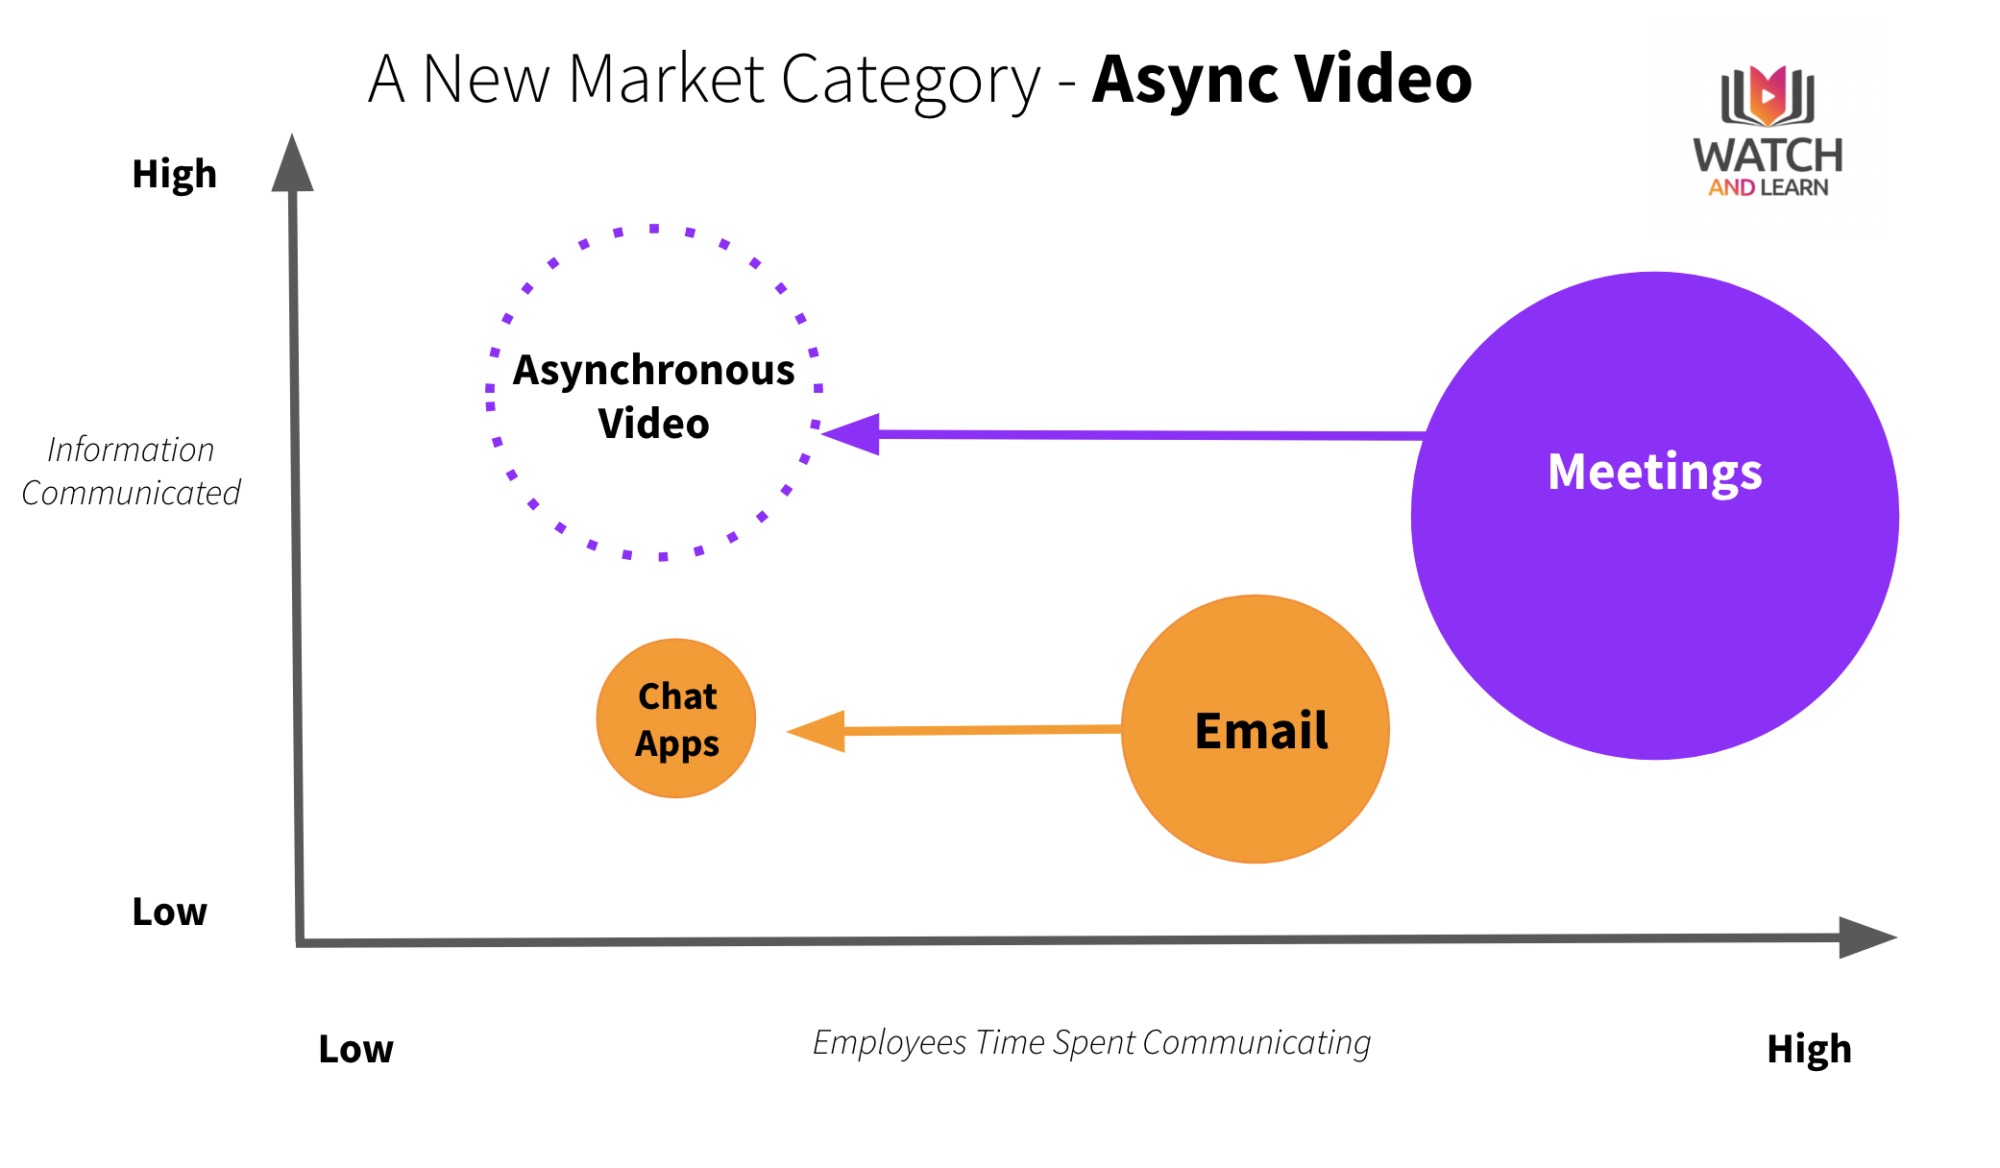 Asynchronous Video to Replace Meetings